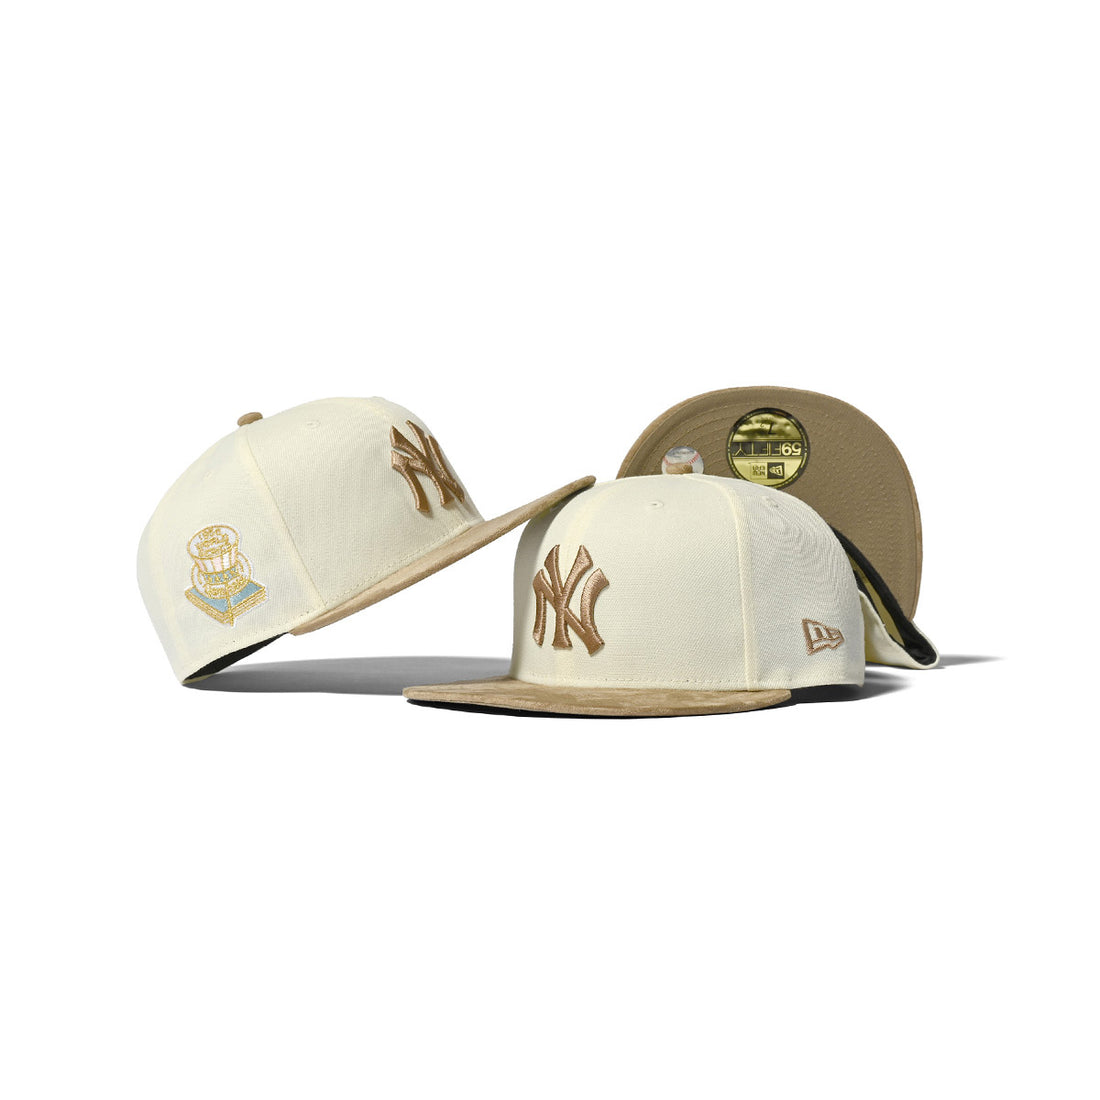 New Era Japan Limited 59Fifty Fitted Hat & Lafayette Rose Logo Tee Now Available!